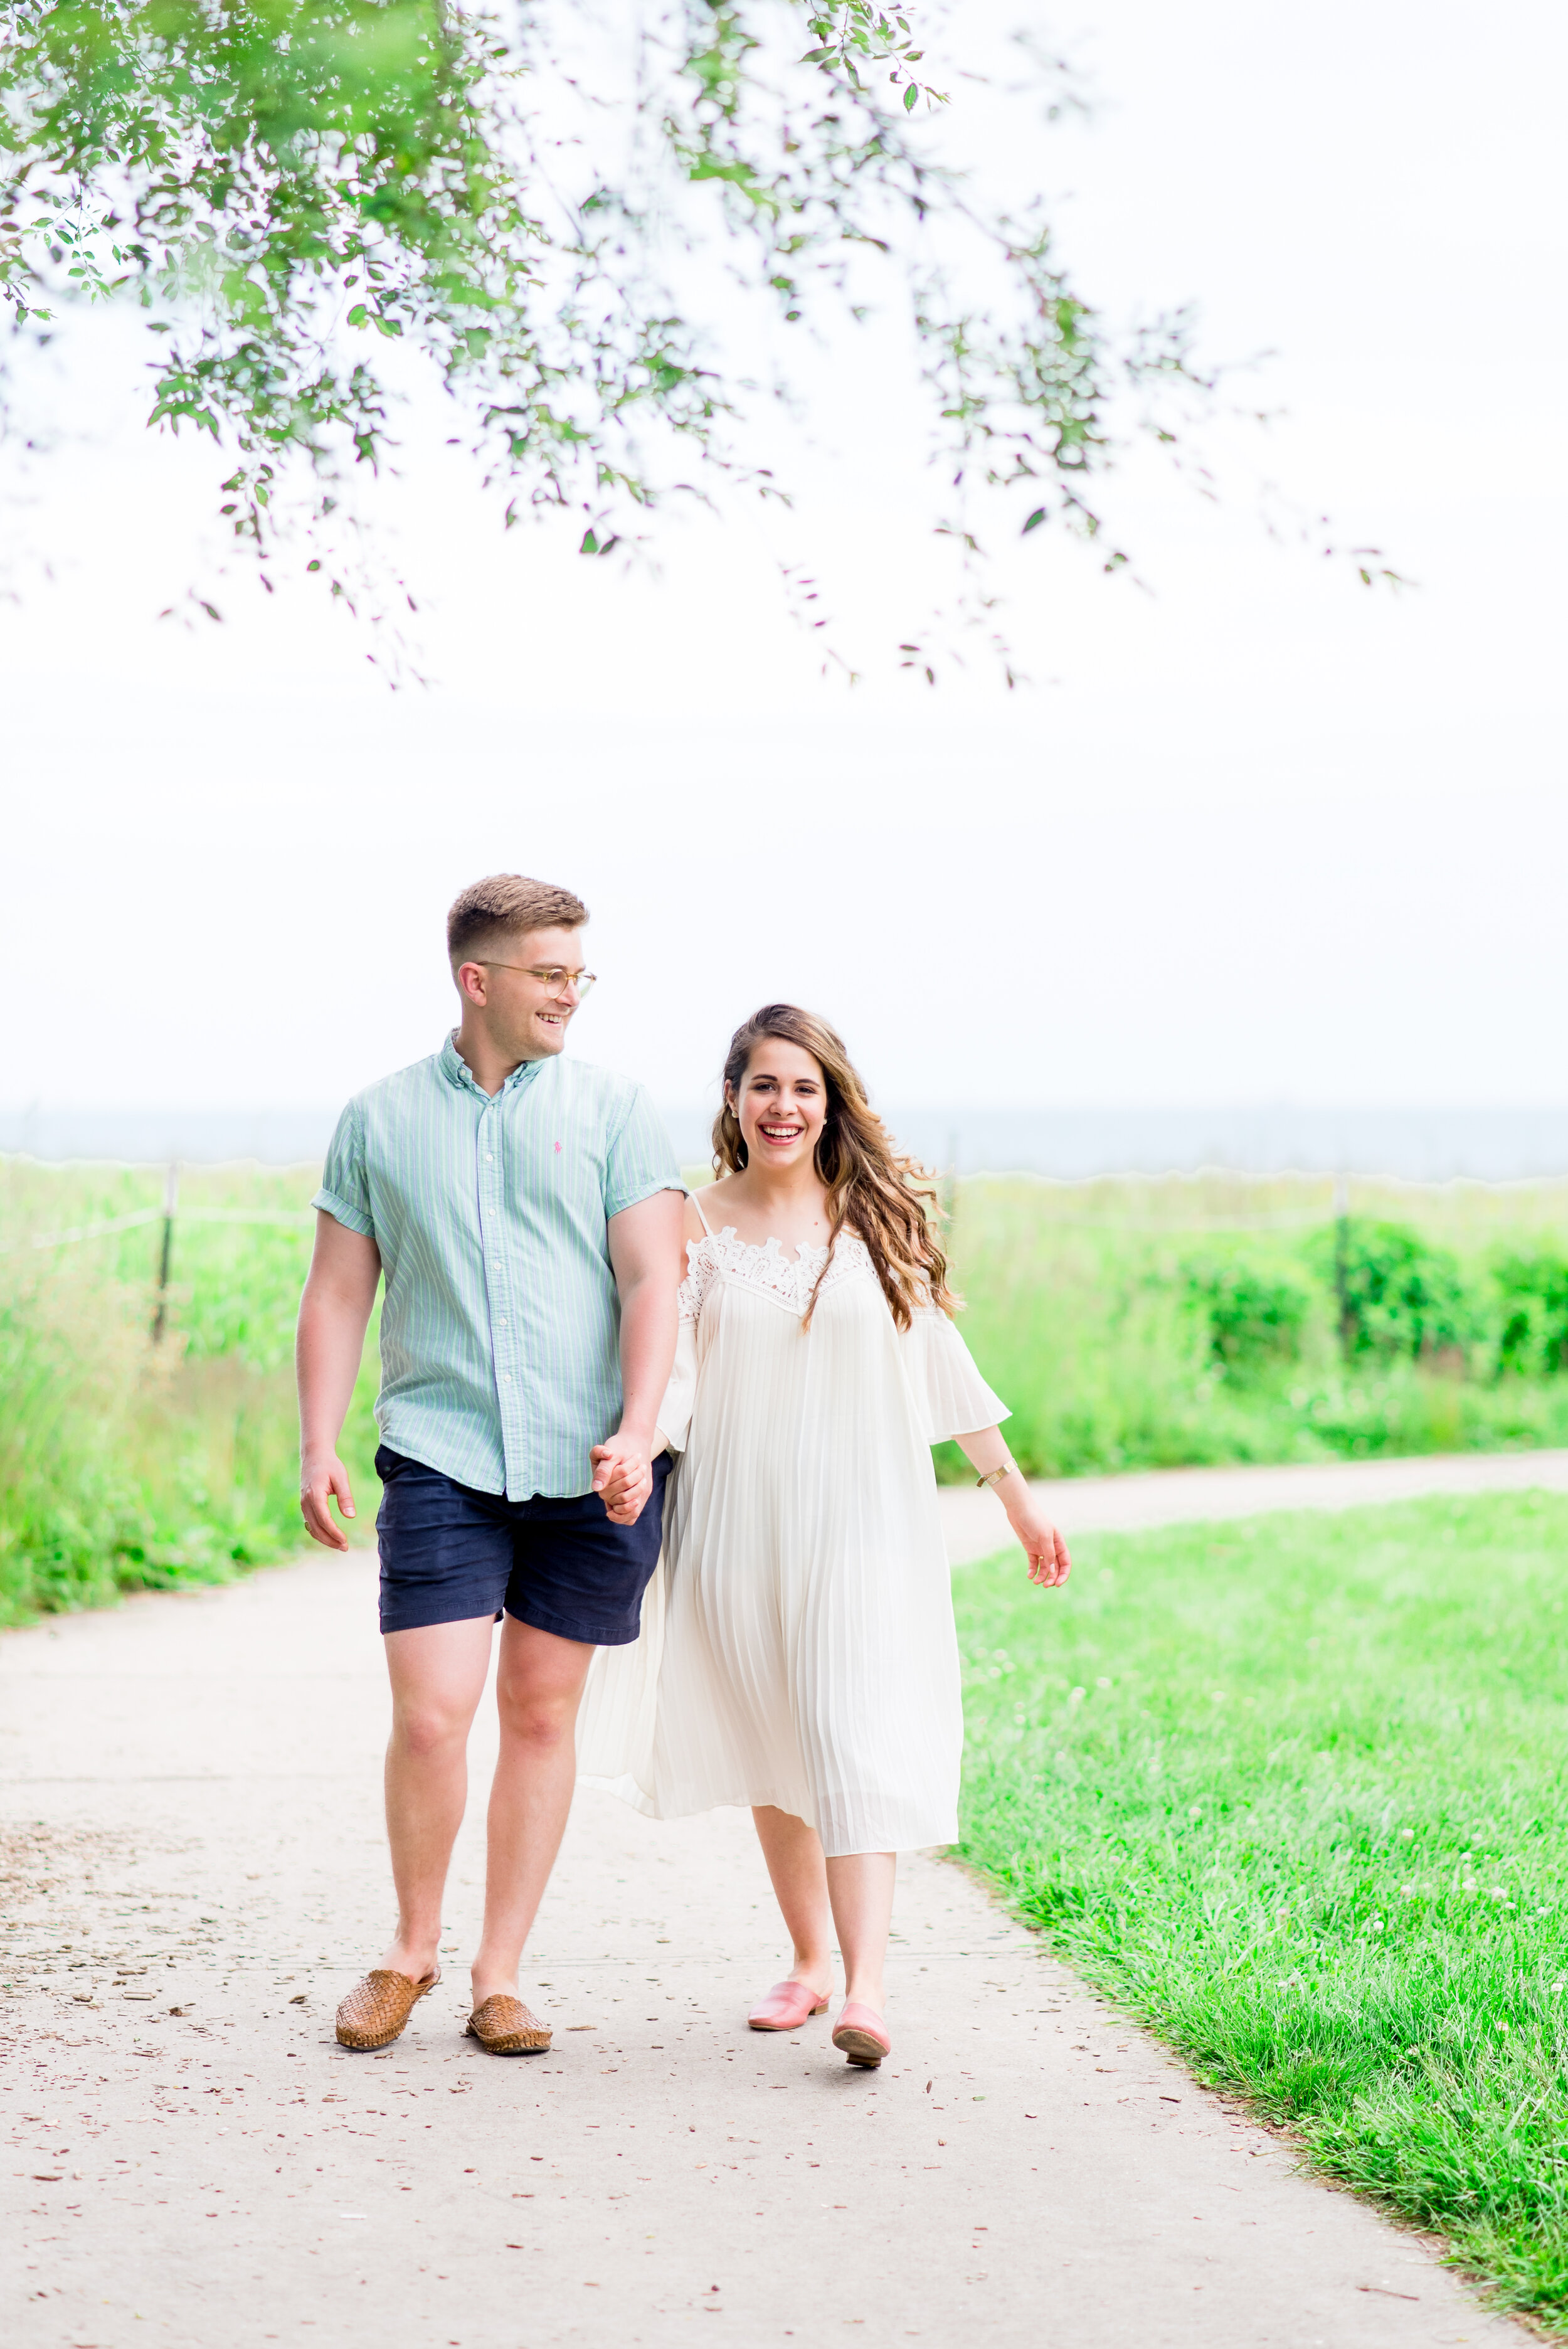 Summer Chicago Engagement Session at Montrose Harbor featured on CHI thee WED